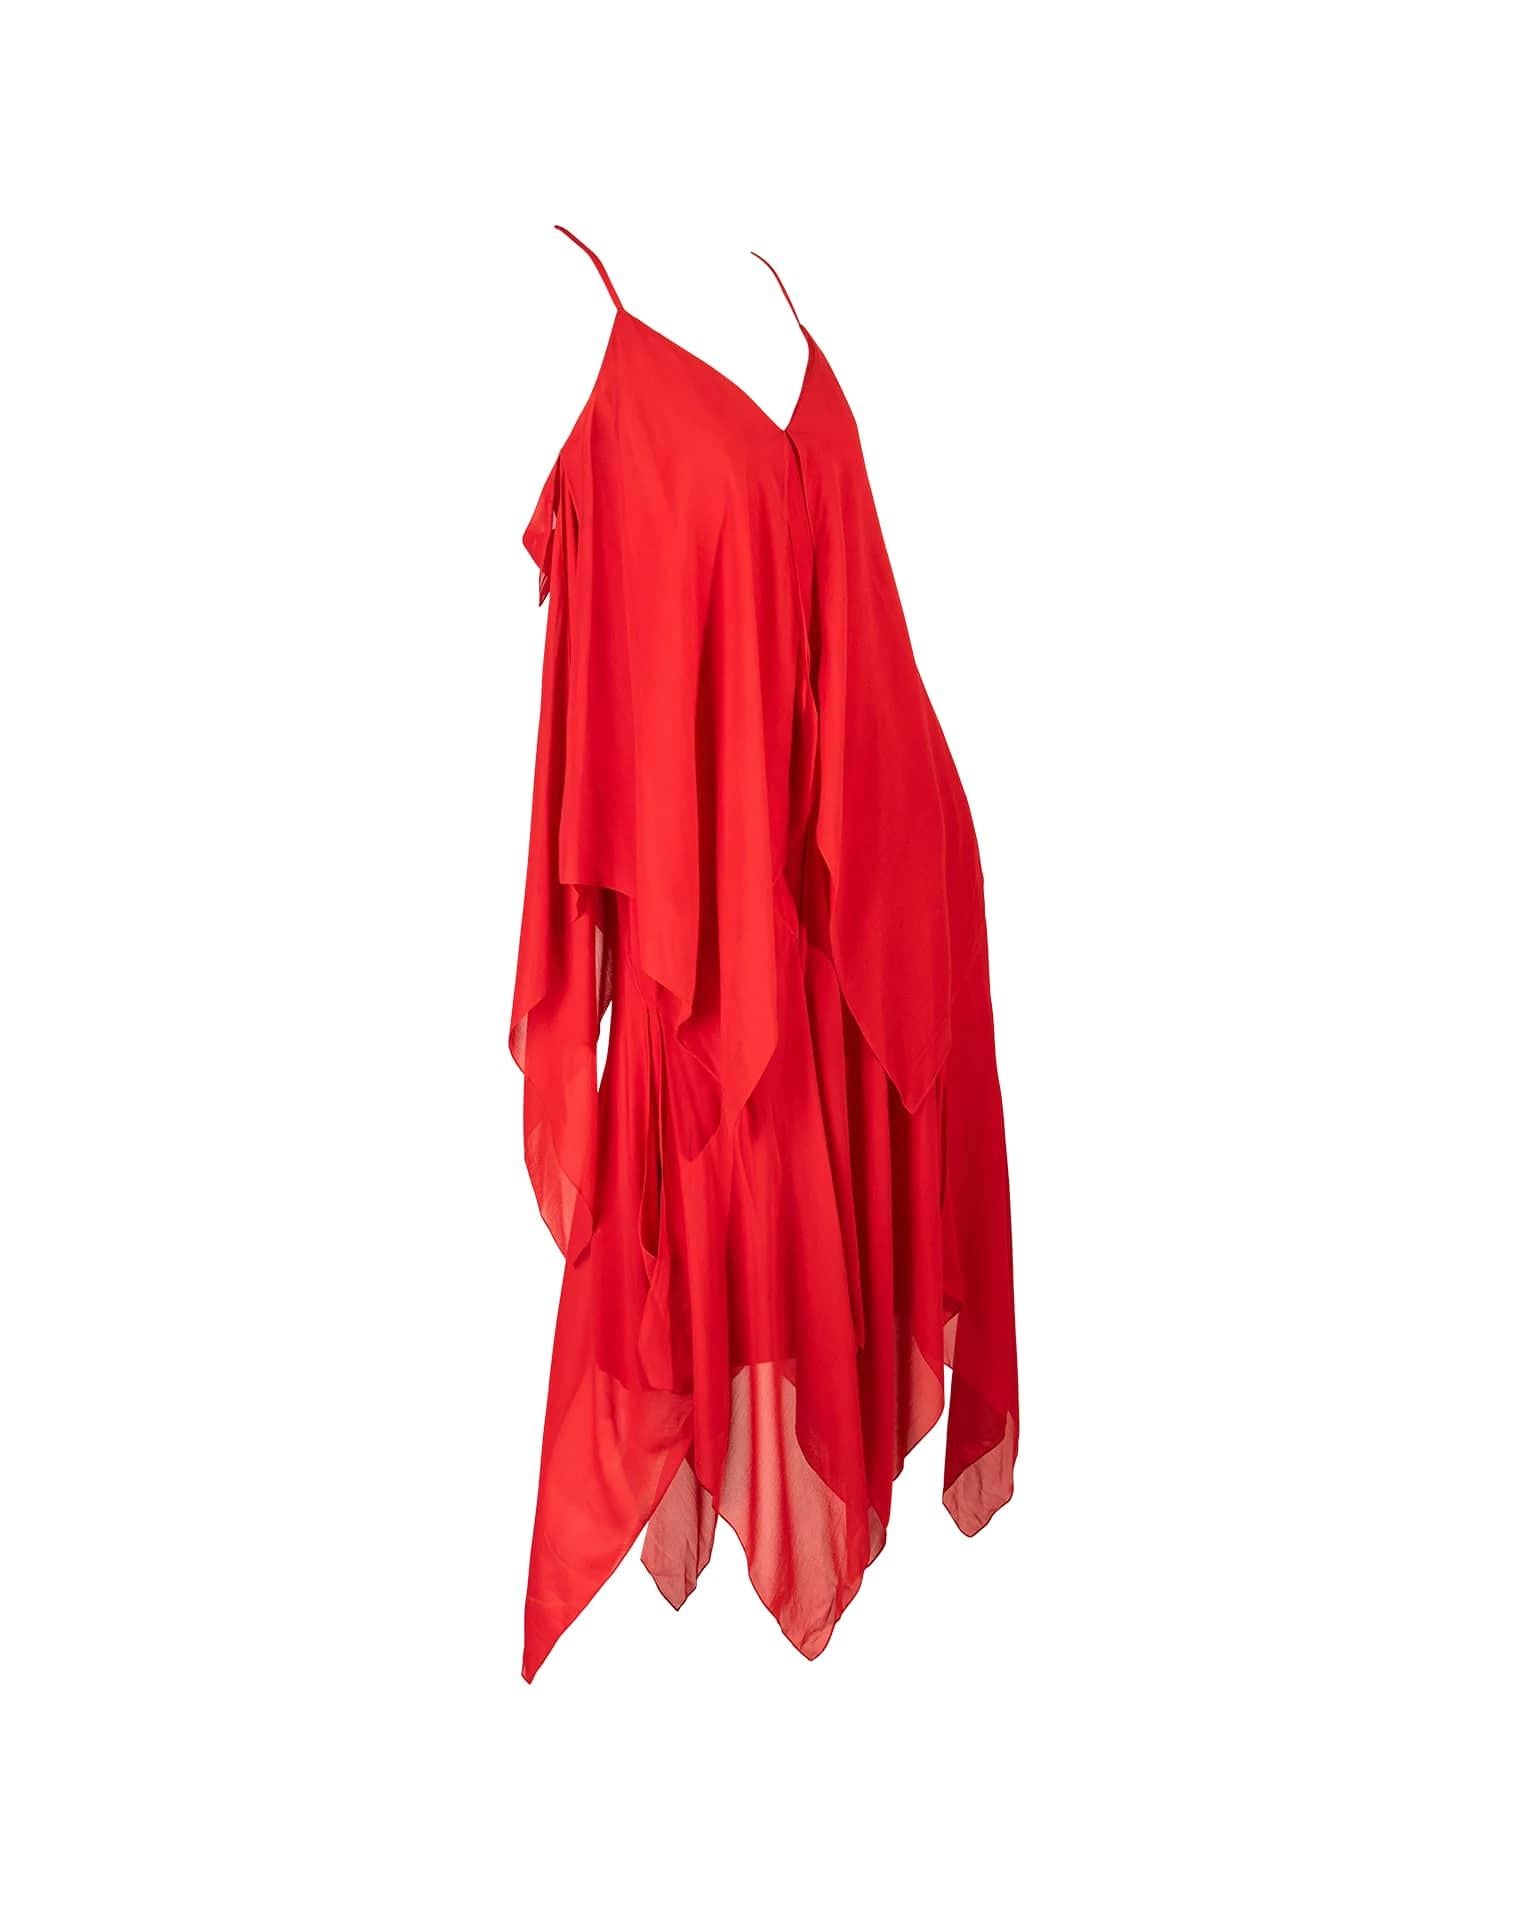 1969 Bill Blass silk chiffon red midi dress with handkerchief hem and panels of silk chiffon throughout. Sleeveless dress with v-neck. A beautiful chic, airy dress. As seen in the Met Museum.